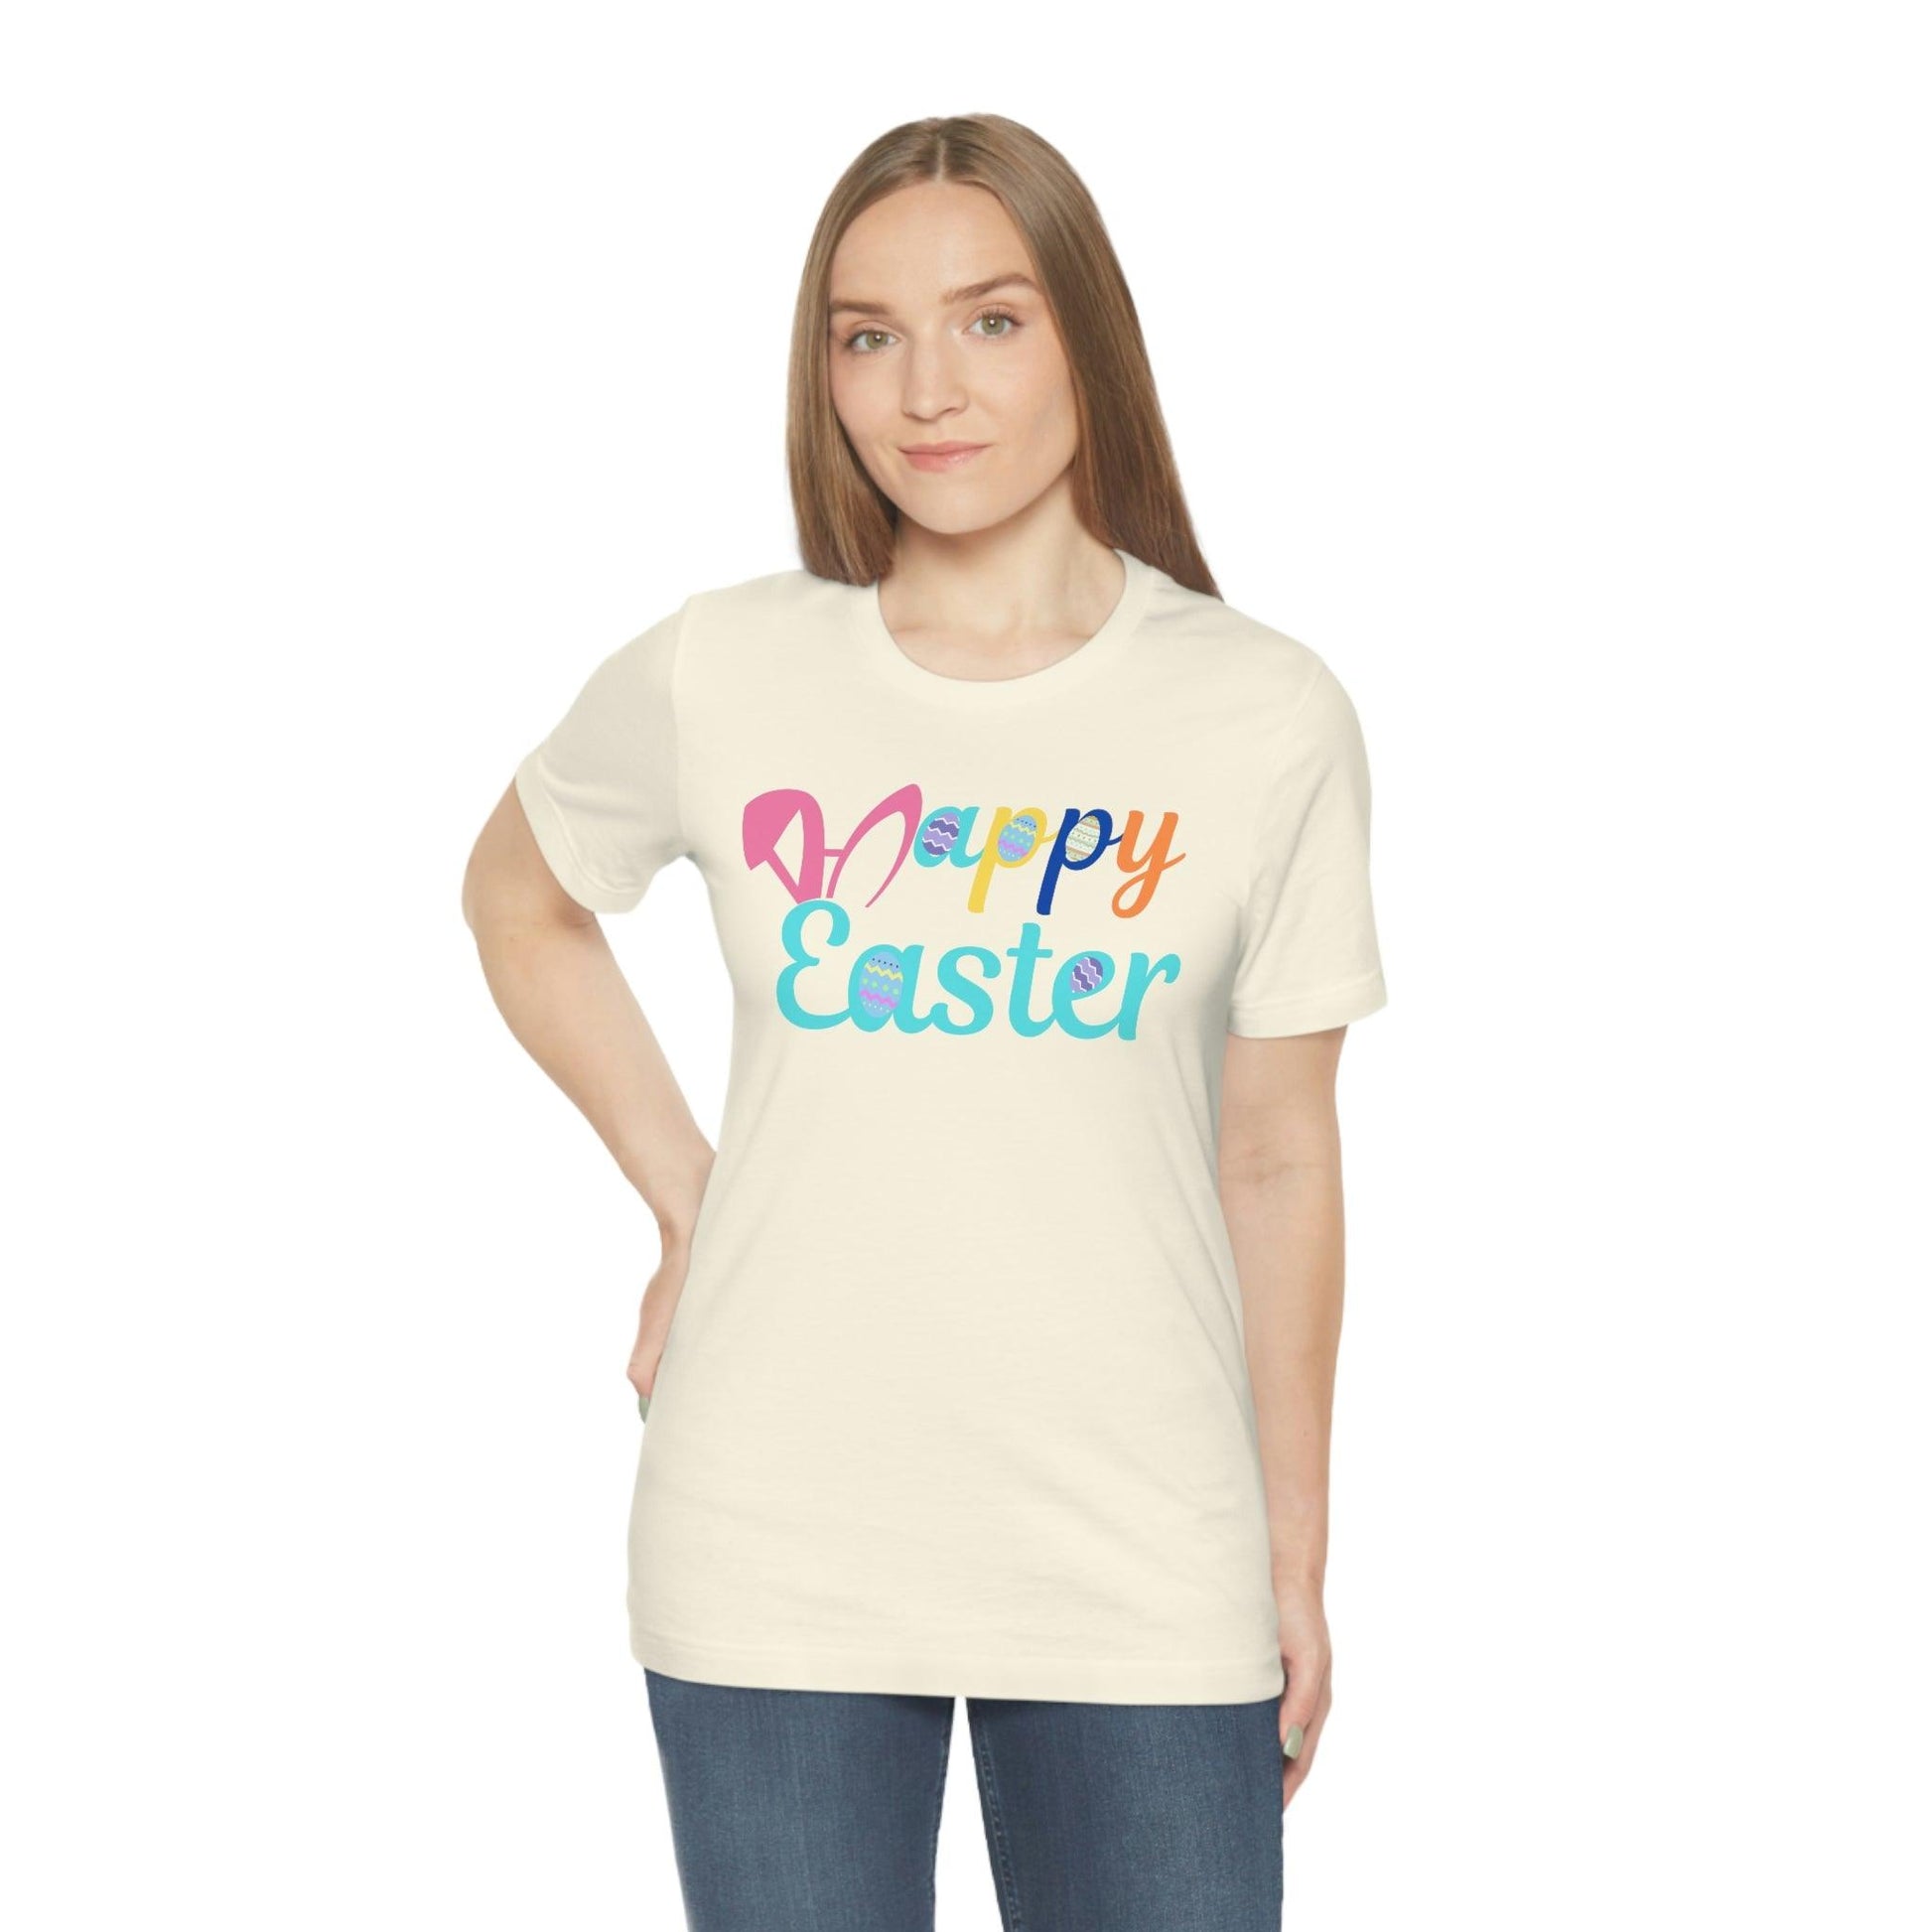 Happy Easter T-shirt, Easter gift for adults, easter shirts - Giftsmojo